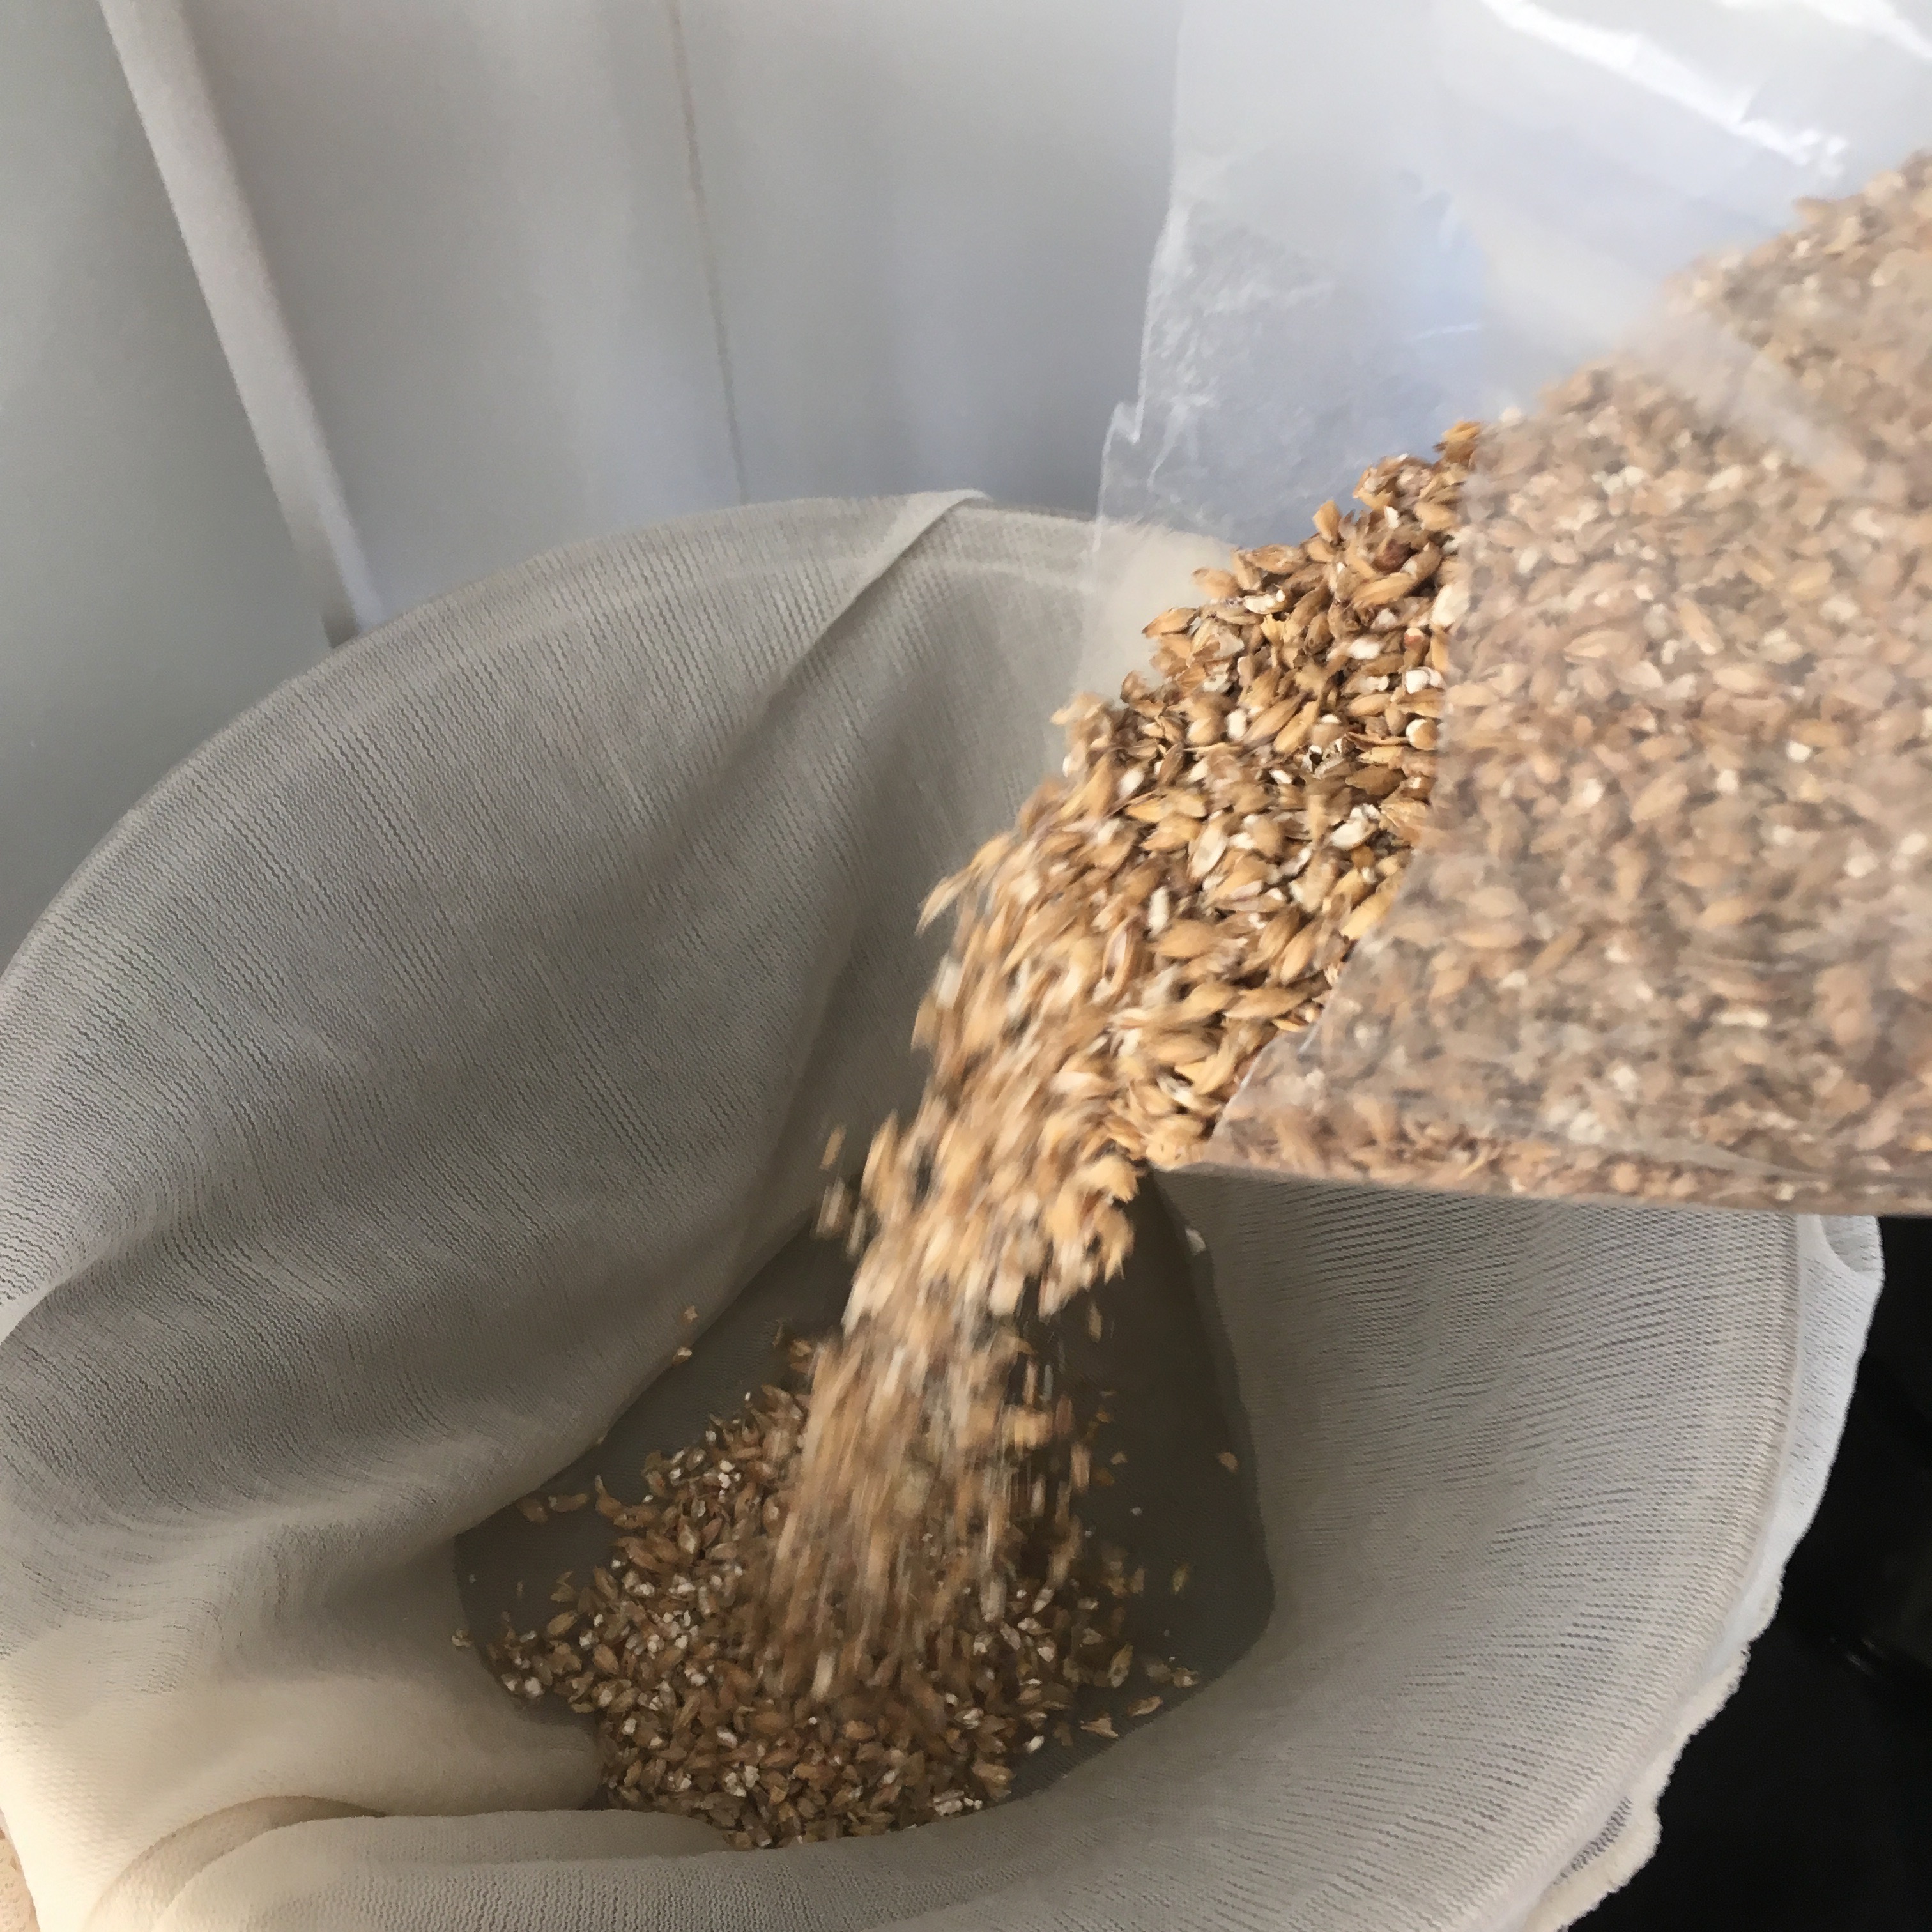 Put the grain bag in and slowly pour in the grain while stirring. If you don't pour slowly clumps will form that you have to break up.